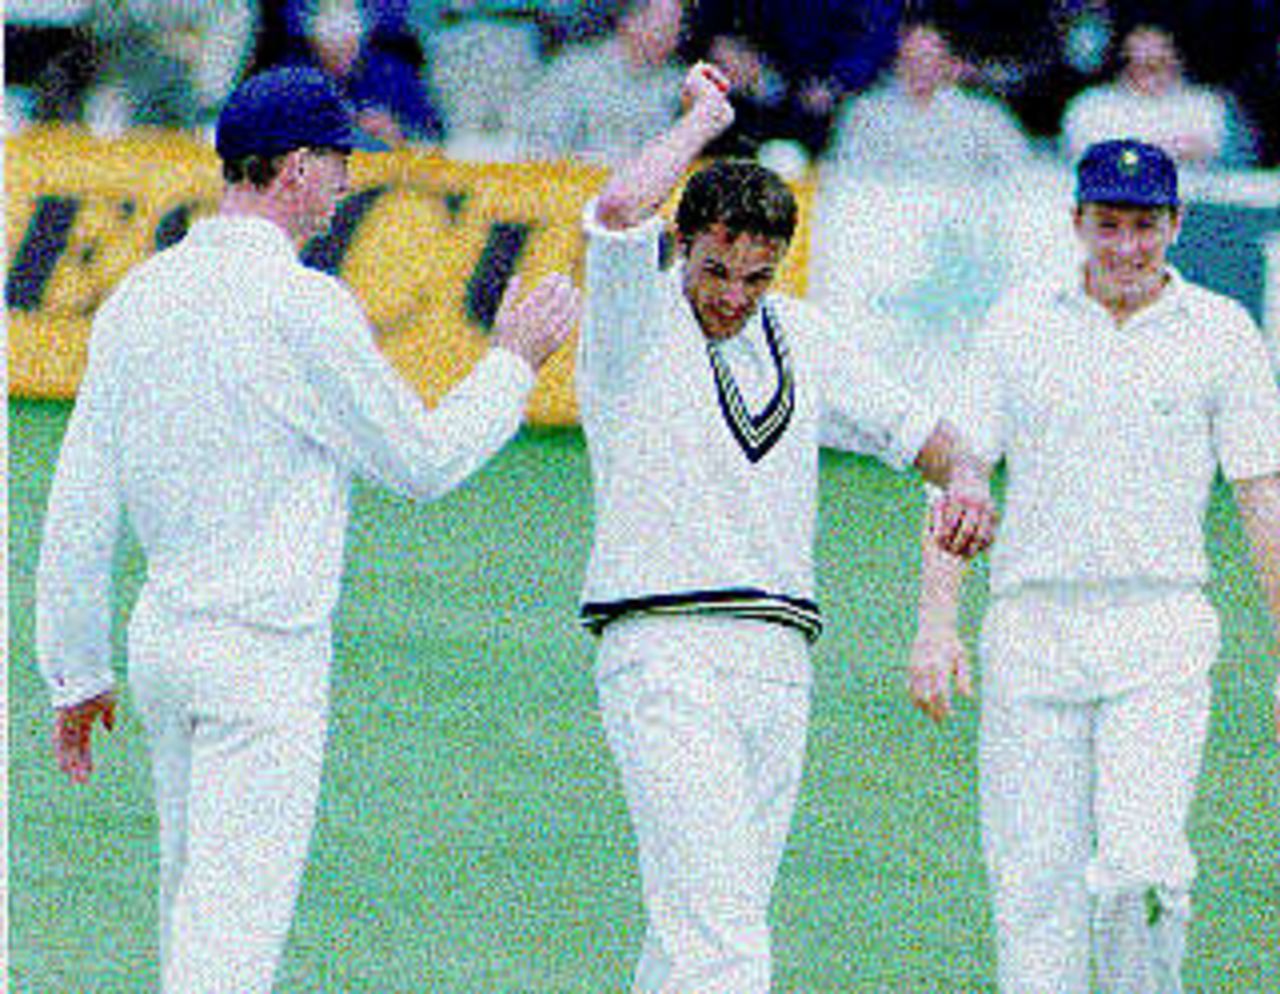 Roland Lefebvre celebrates another wicket in the Benson and Hedges Cup fixture with Sussex in 1993